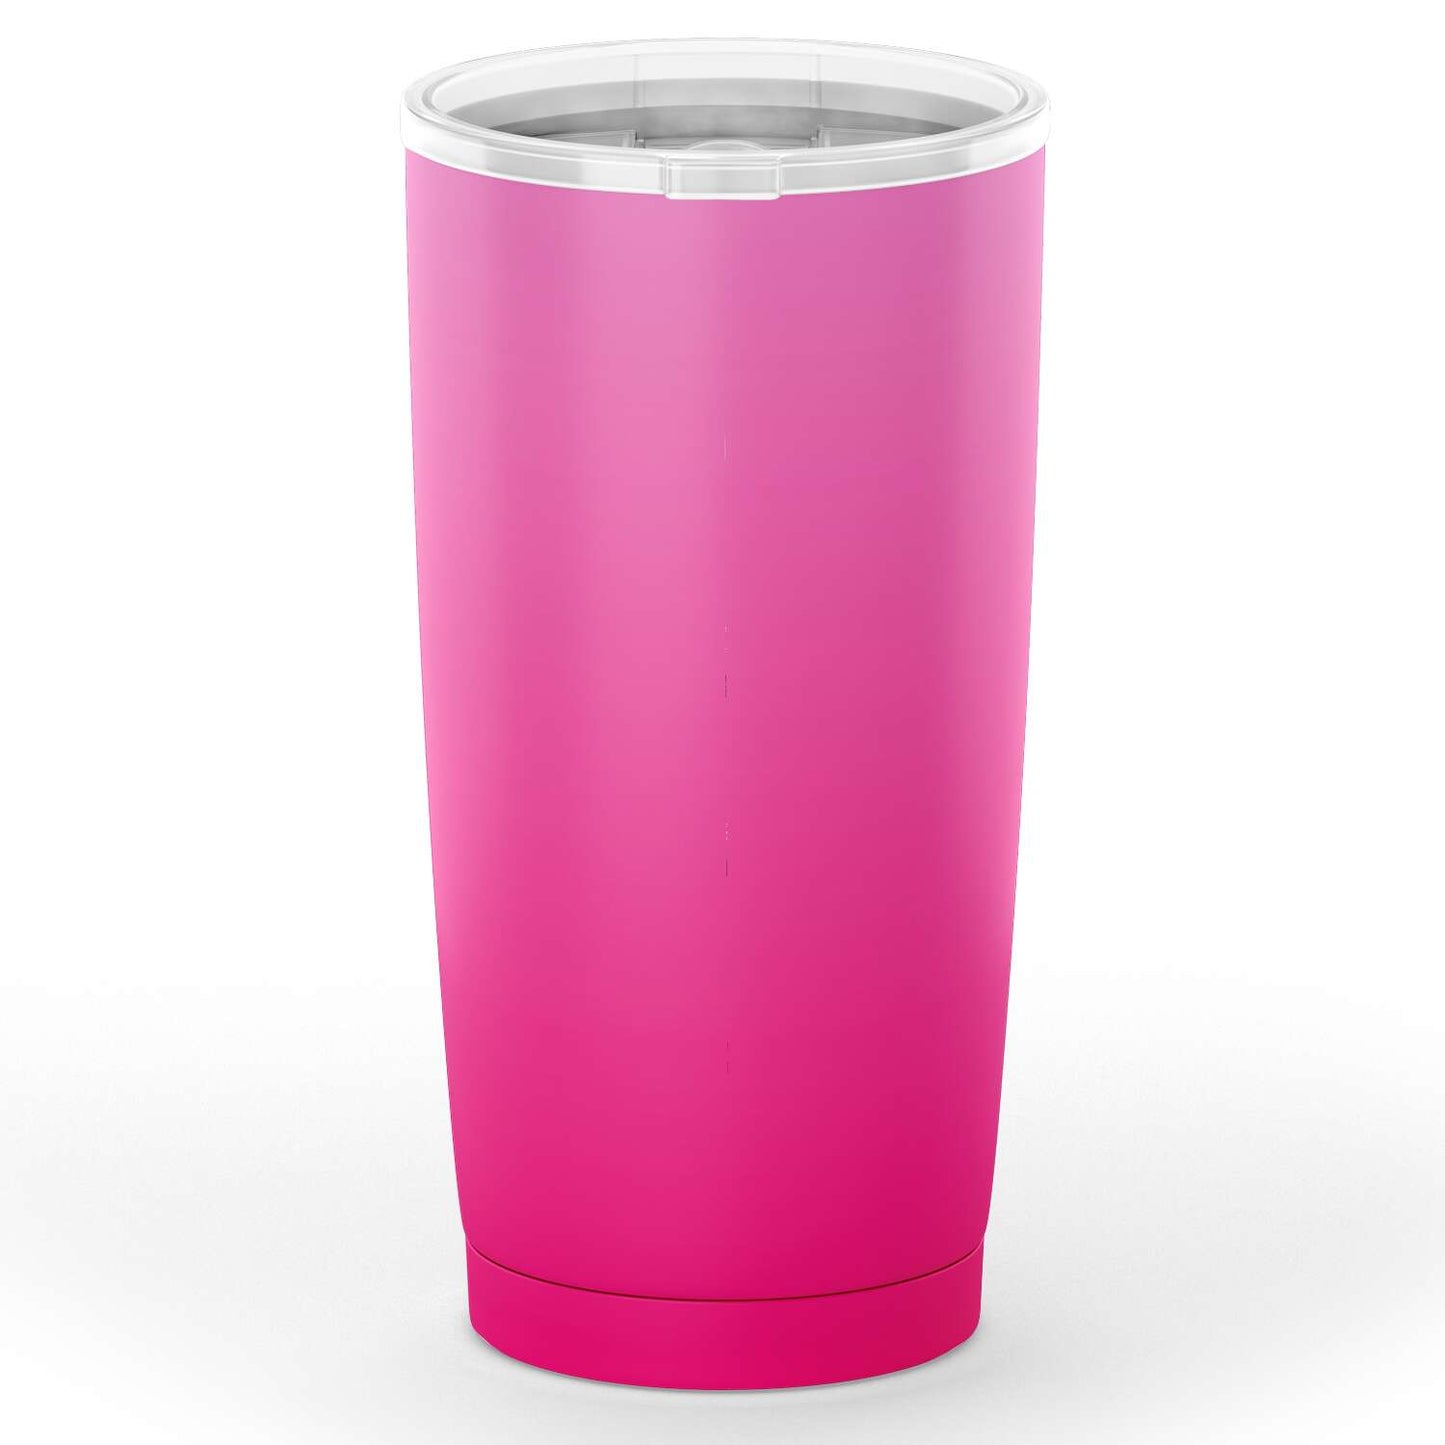 Cute Tumblers | Give Cancer The Boot Breast Cancer Awareness Tumbler-20oz Tumbler - AOP-TD Gift Solutions.com